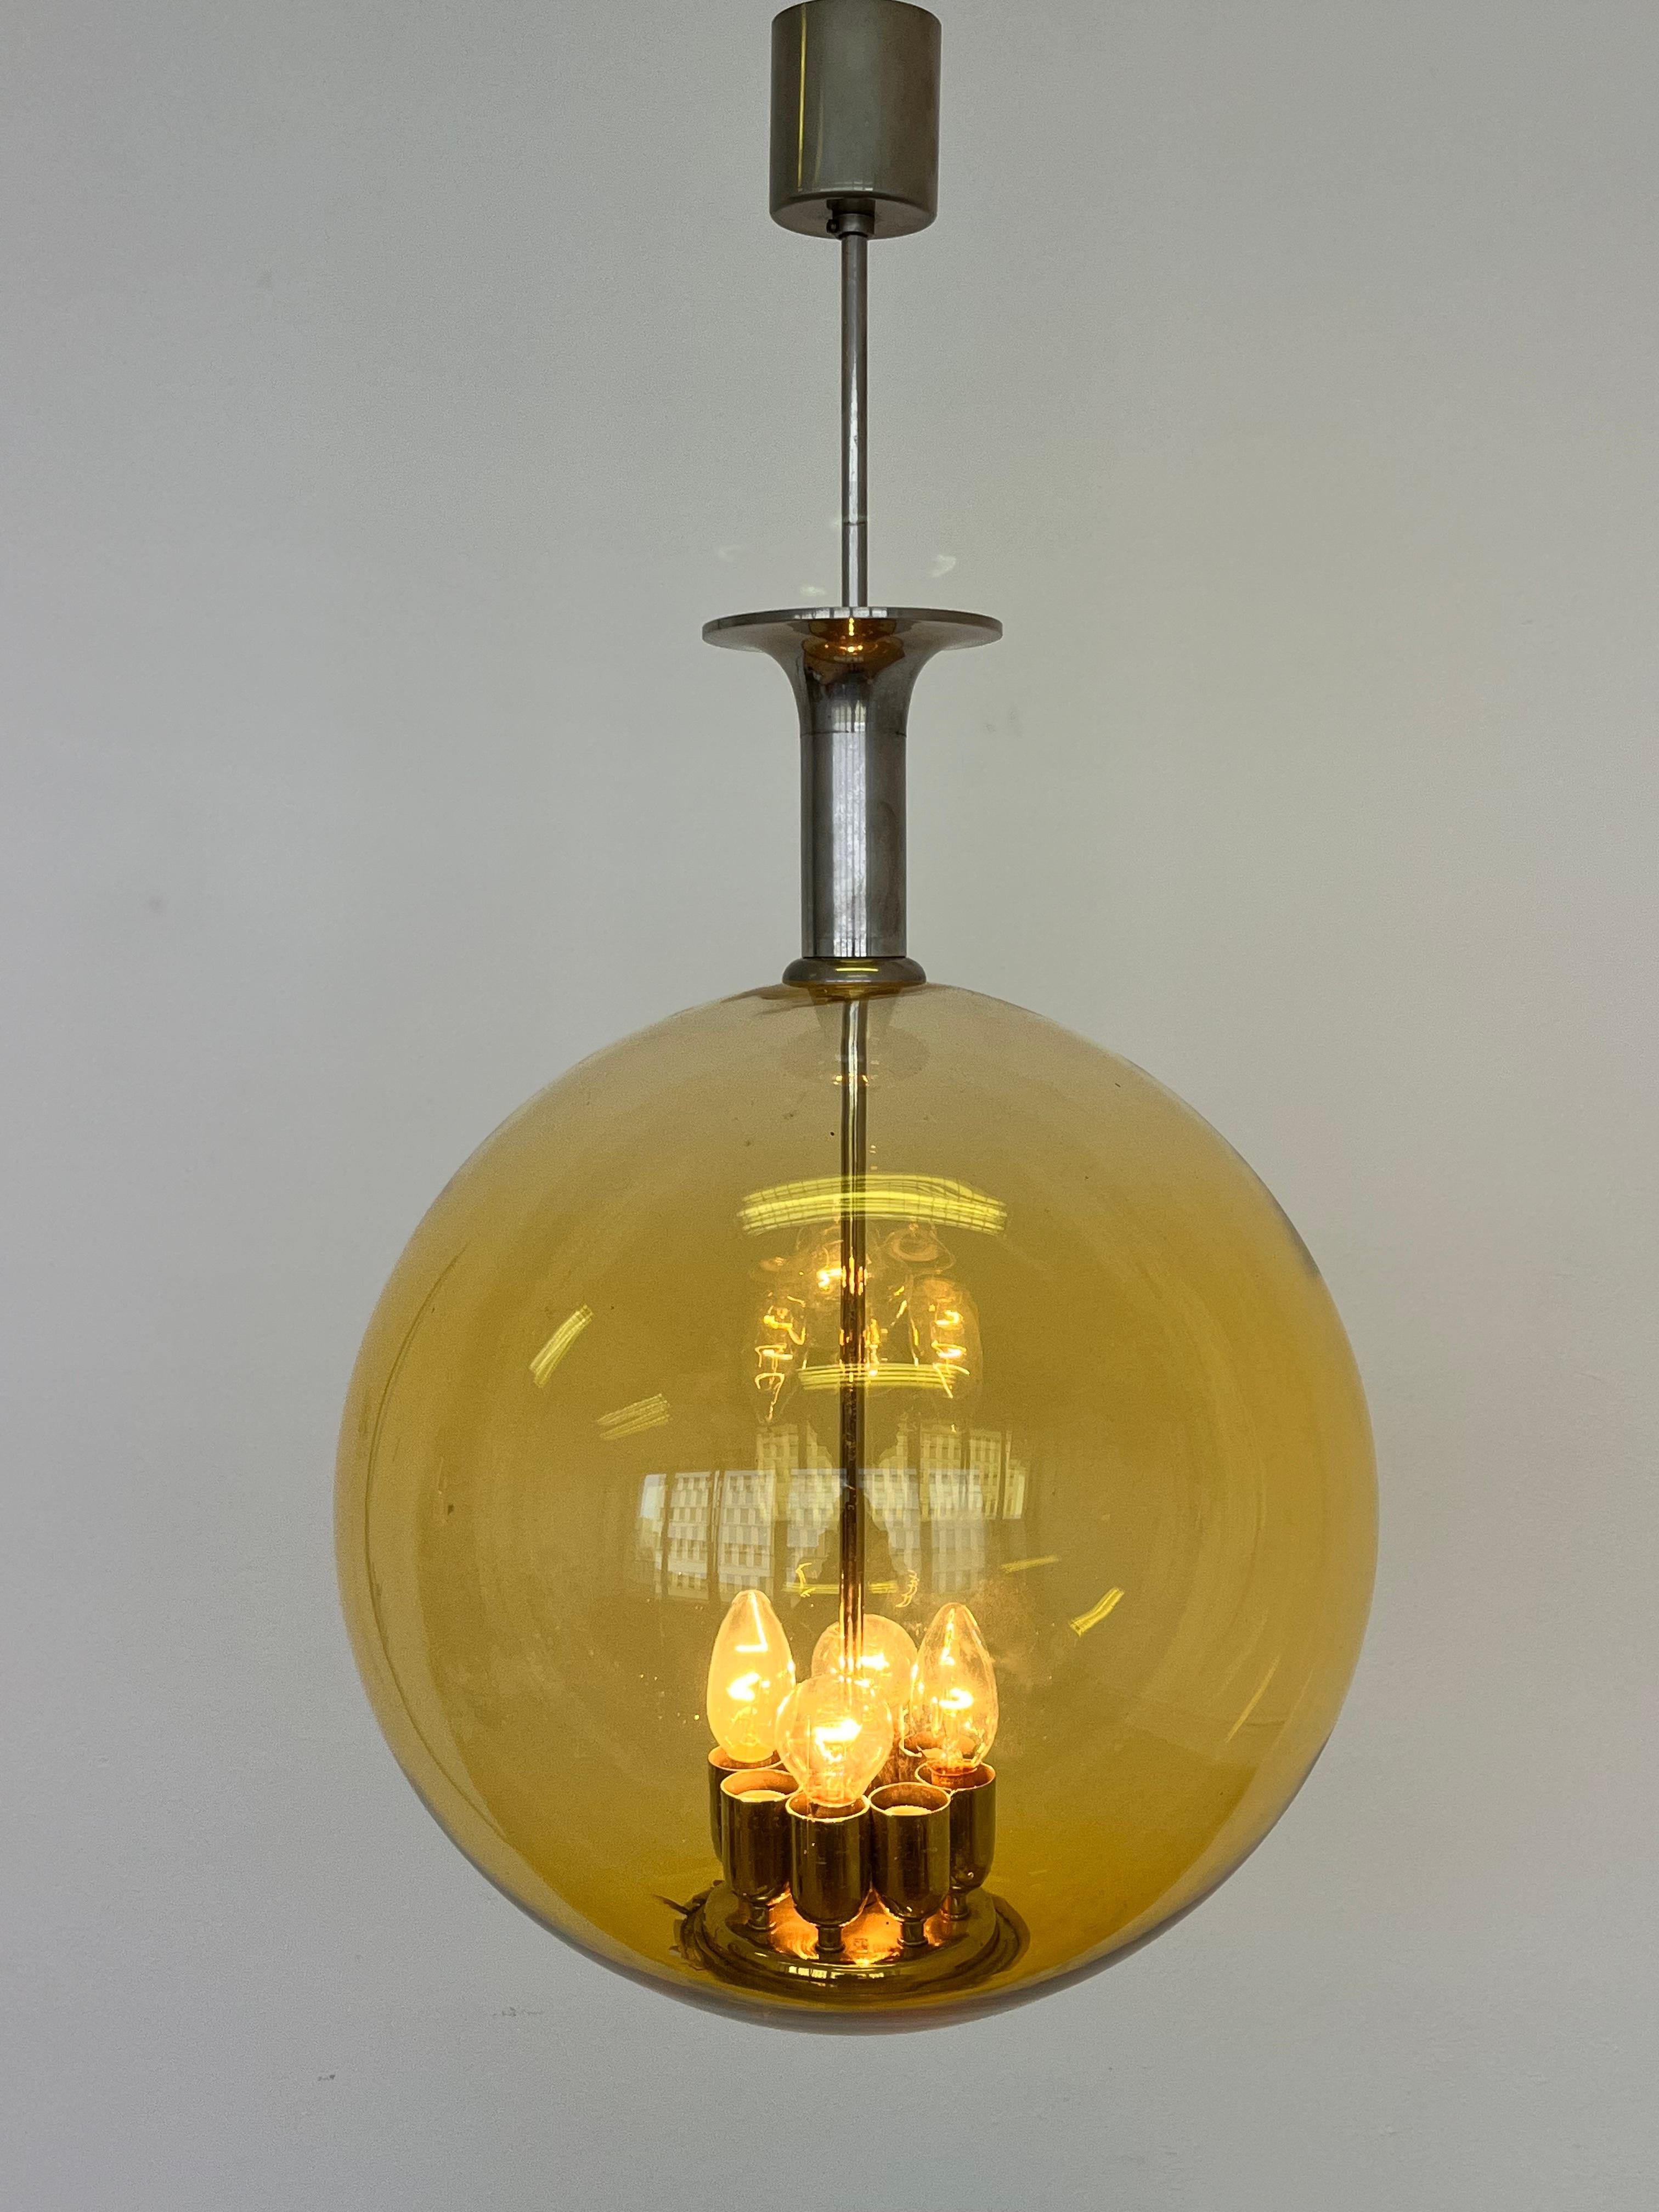 - Czechoslovakia, 1930s
- Rewired: 8 small bulbs any wattage
- polished
- US wiring compatible
- glass down with small chips,staying the same size, no crackles!!
- jr